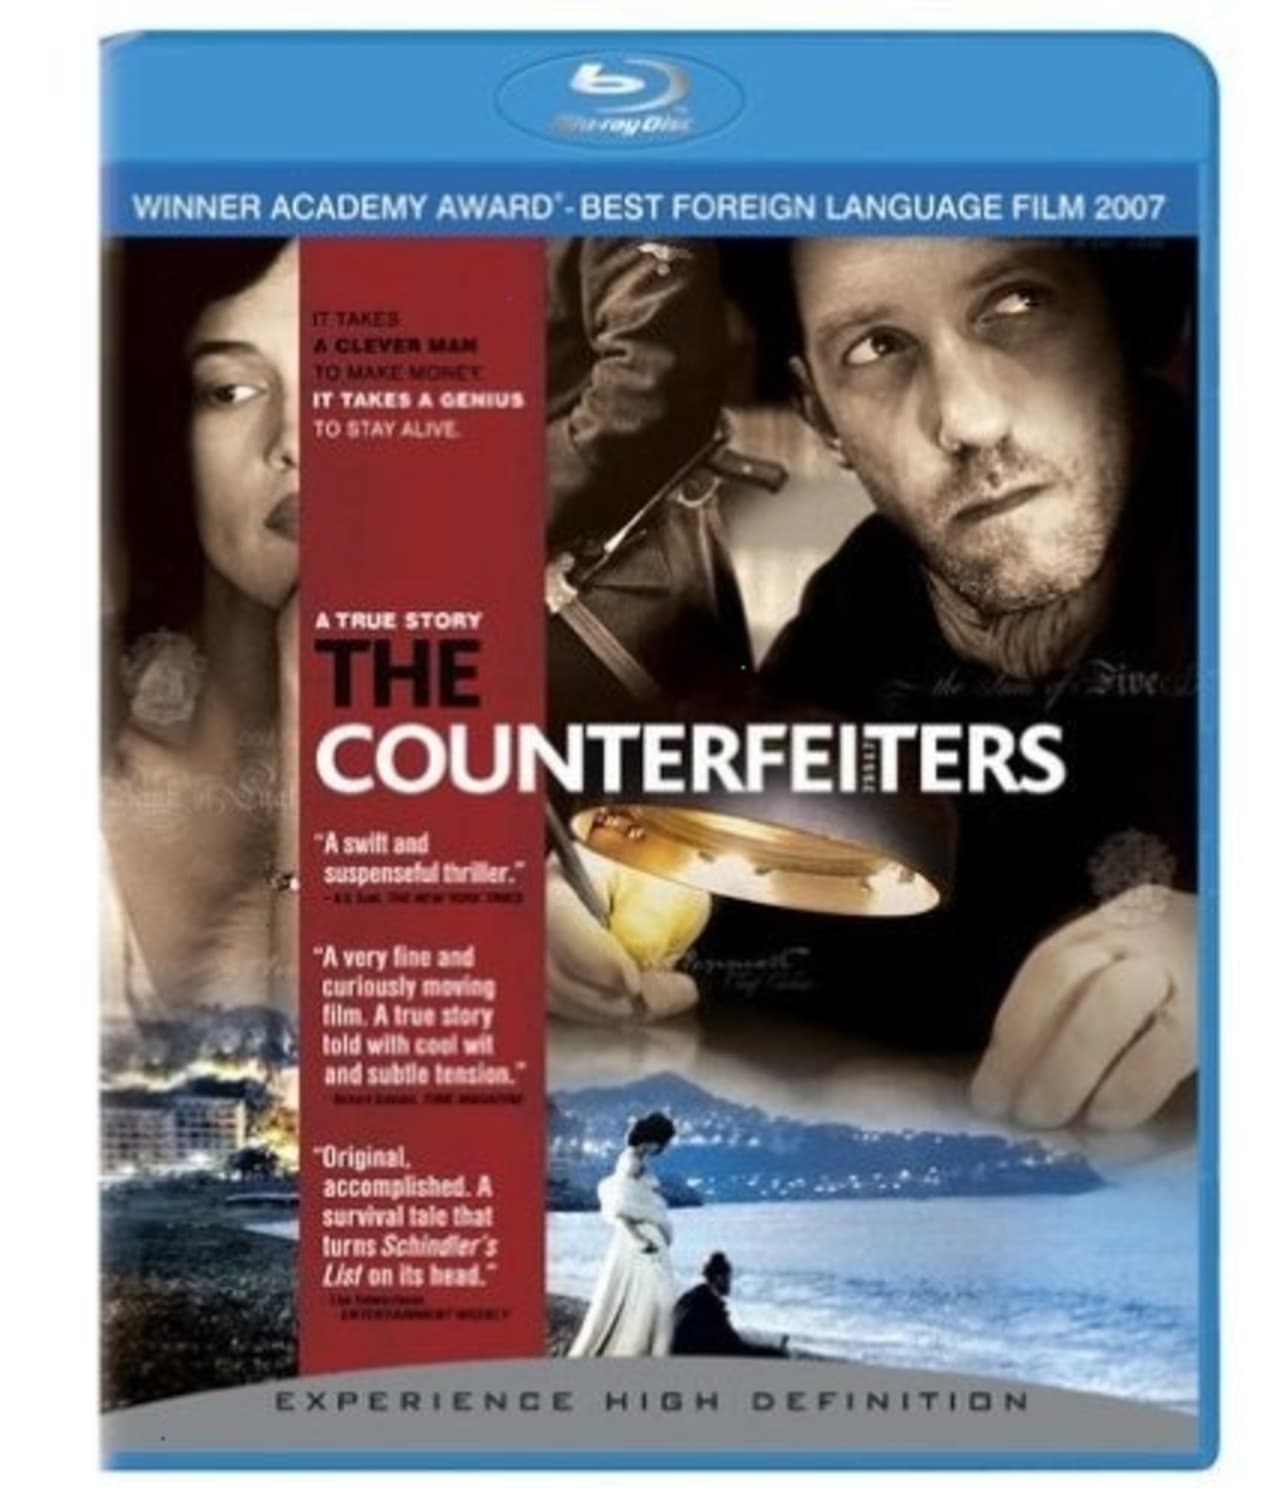 The Counterfeiters (Blu-ray) on MovieShack